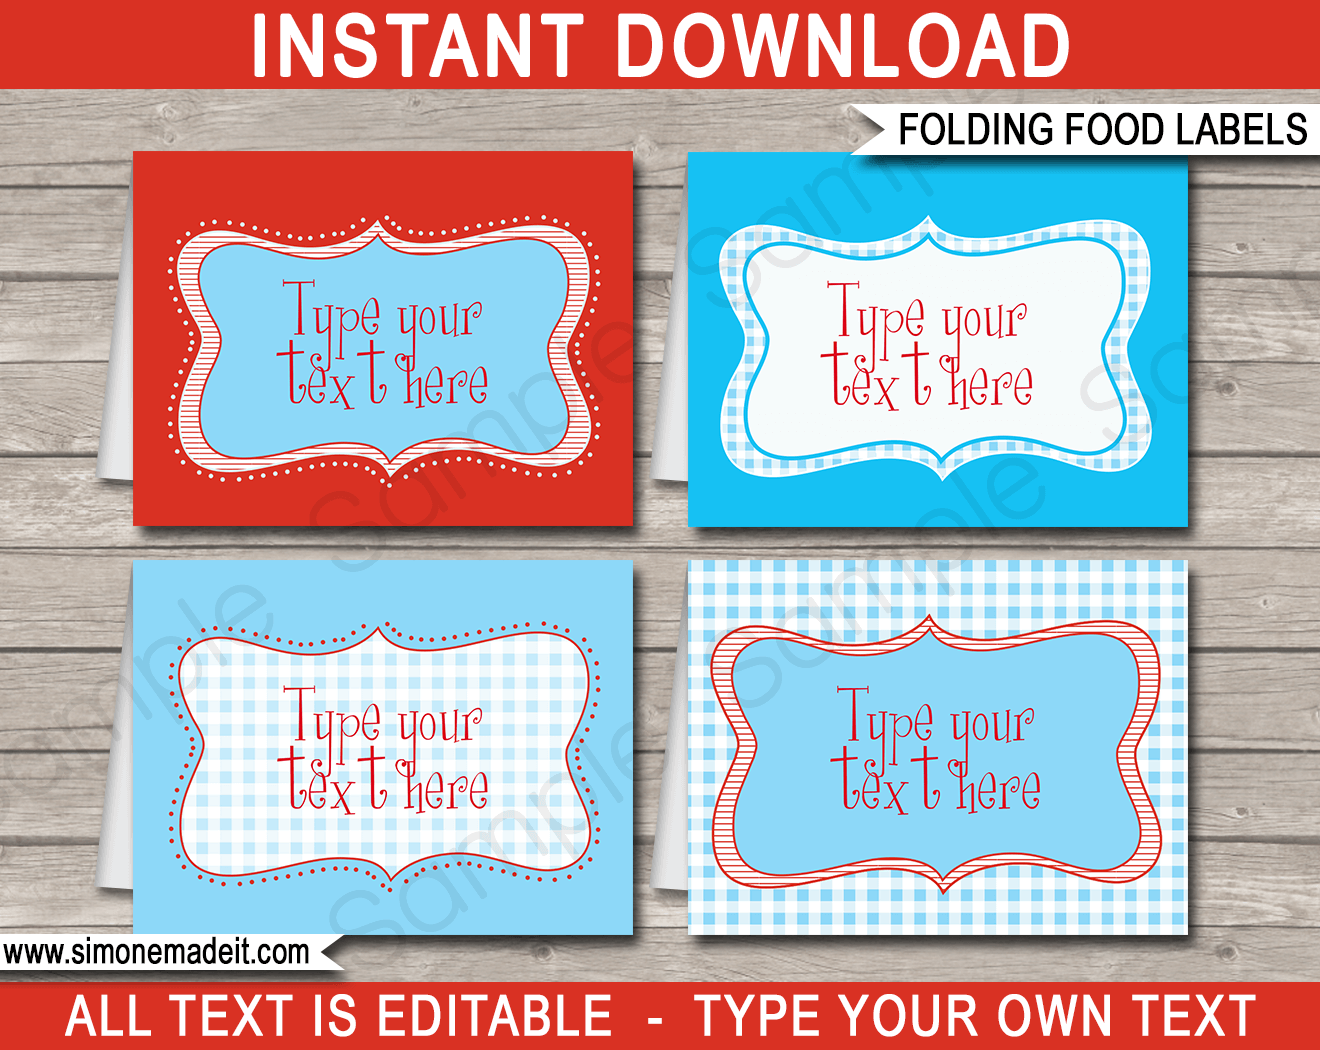 wizard-of-oz-theme-food-labels-template-place-cards-birthday-party